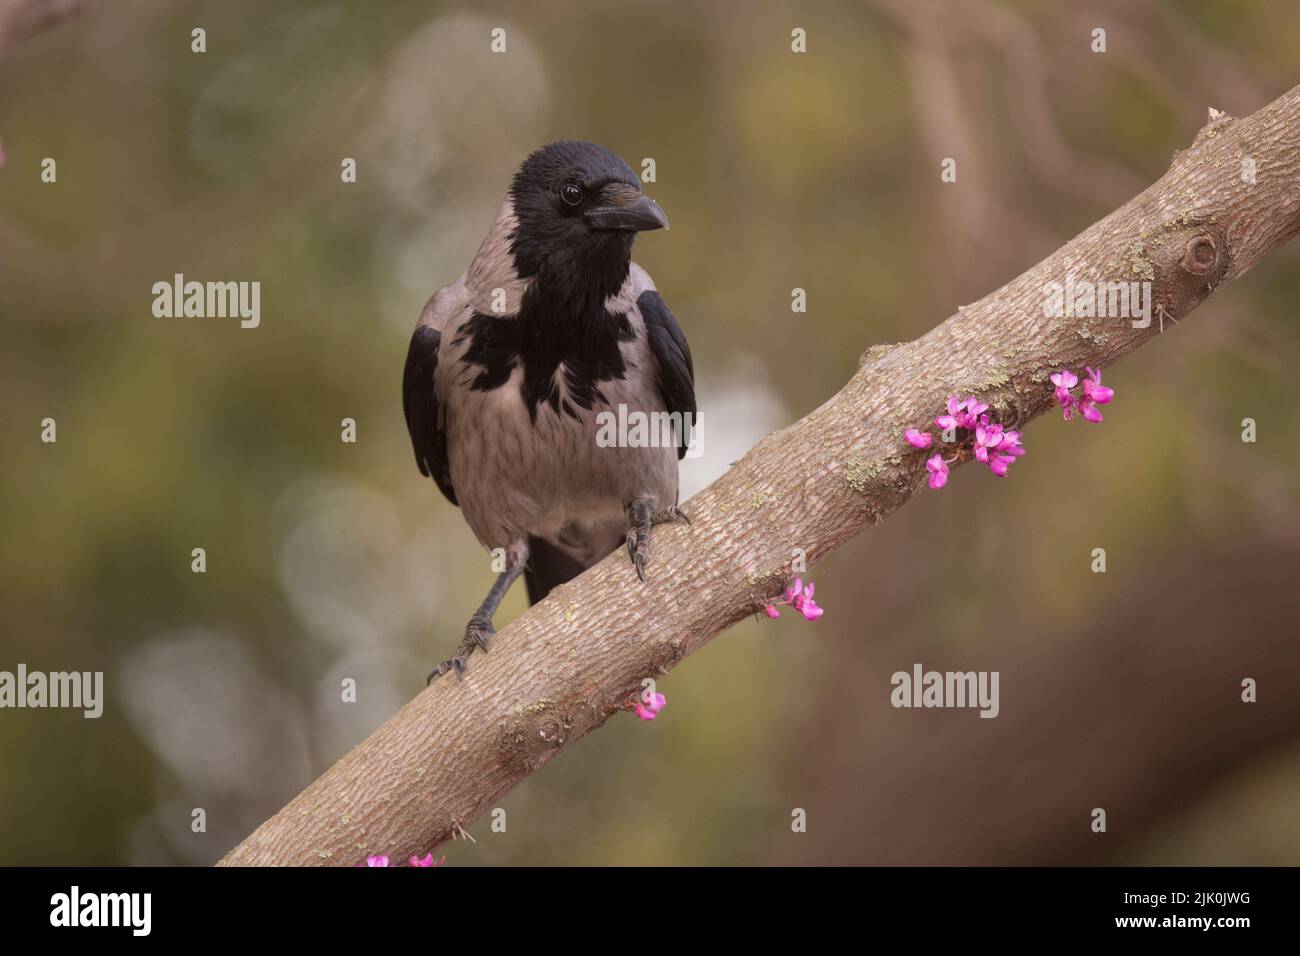 Hooded crow (Corvus cornix) perched on a branch The hooded crow is a widespread bird found throughout much of Europe and the Middle East. It is an omn Stock Photo